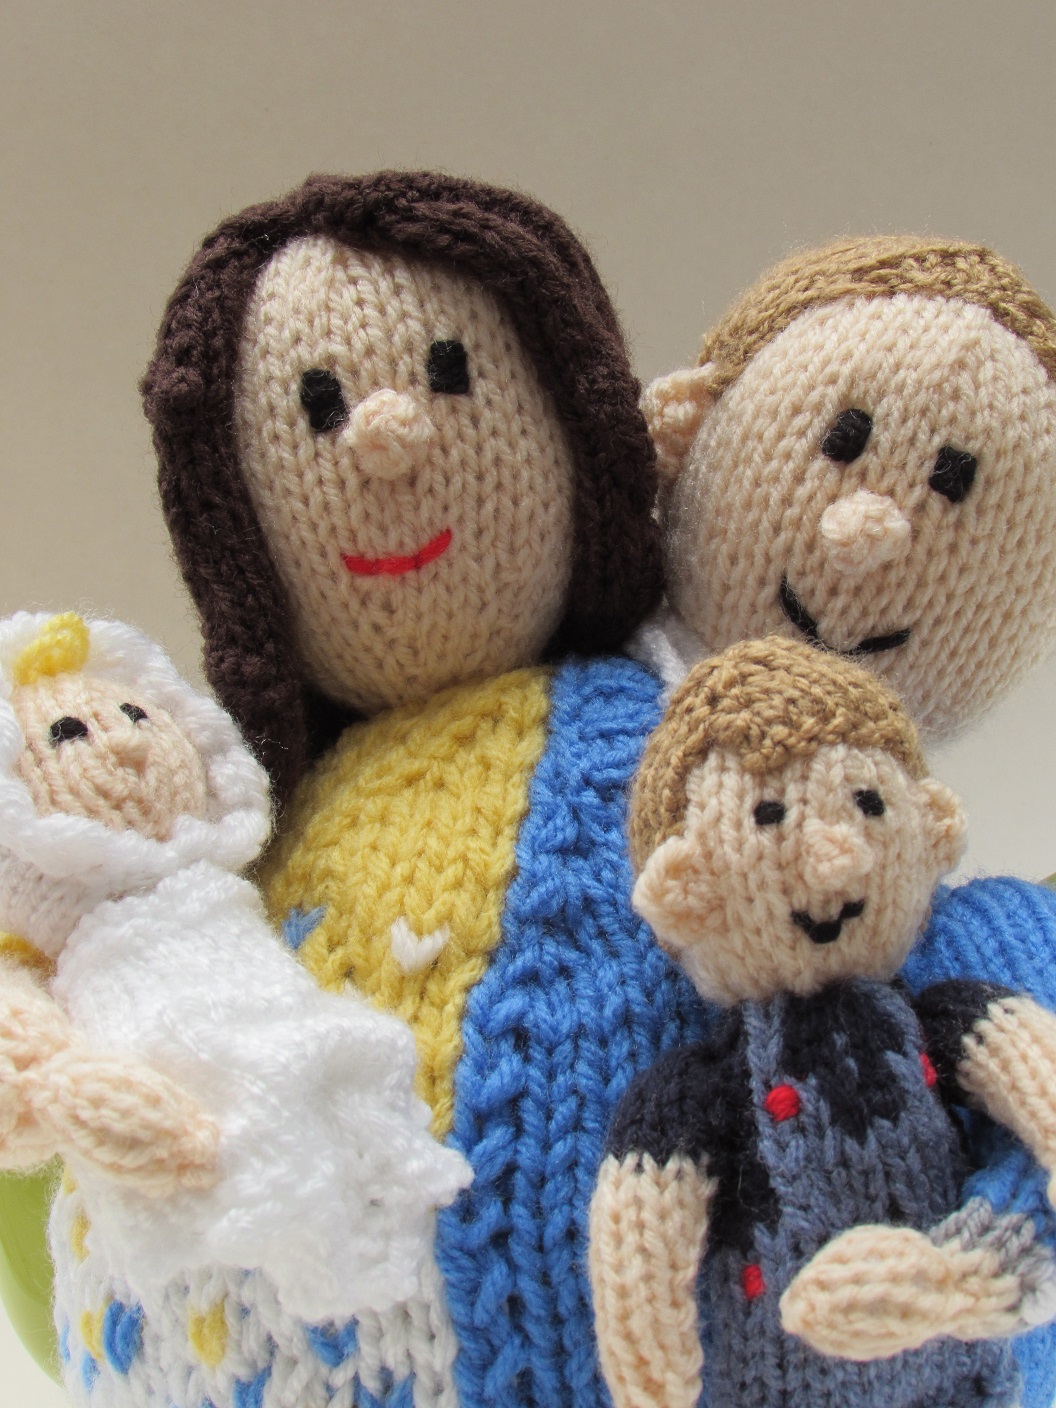 Will and Kate knitting pattern